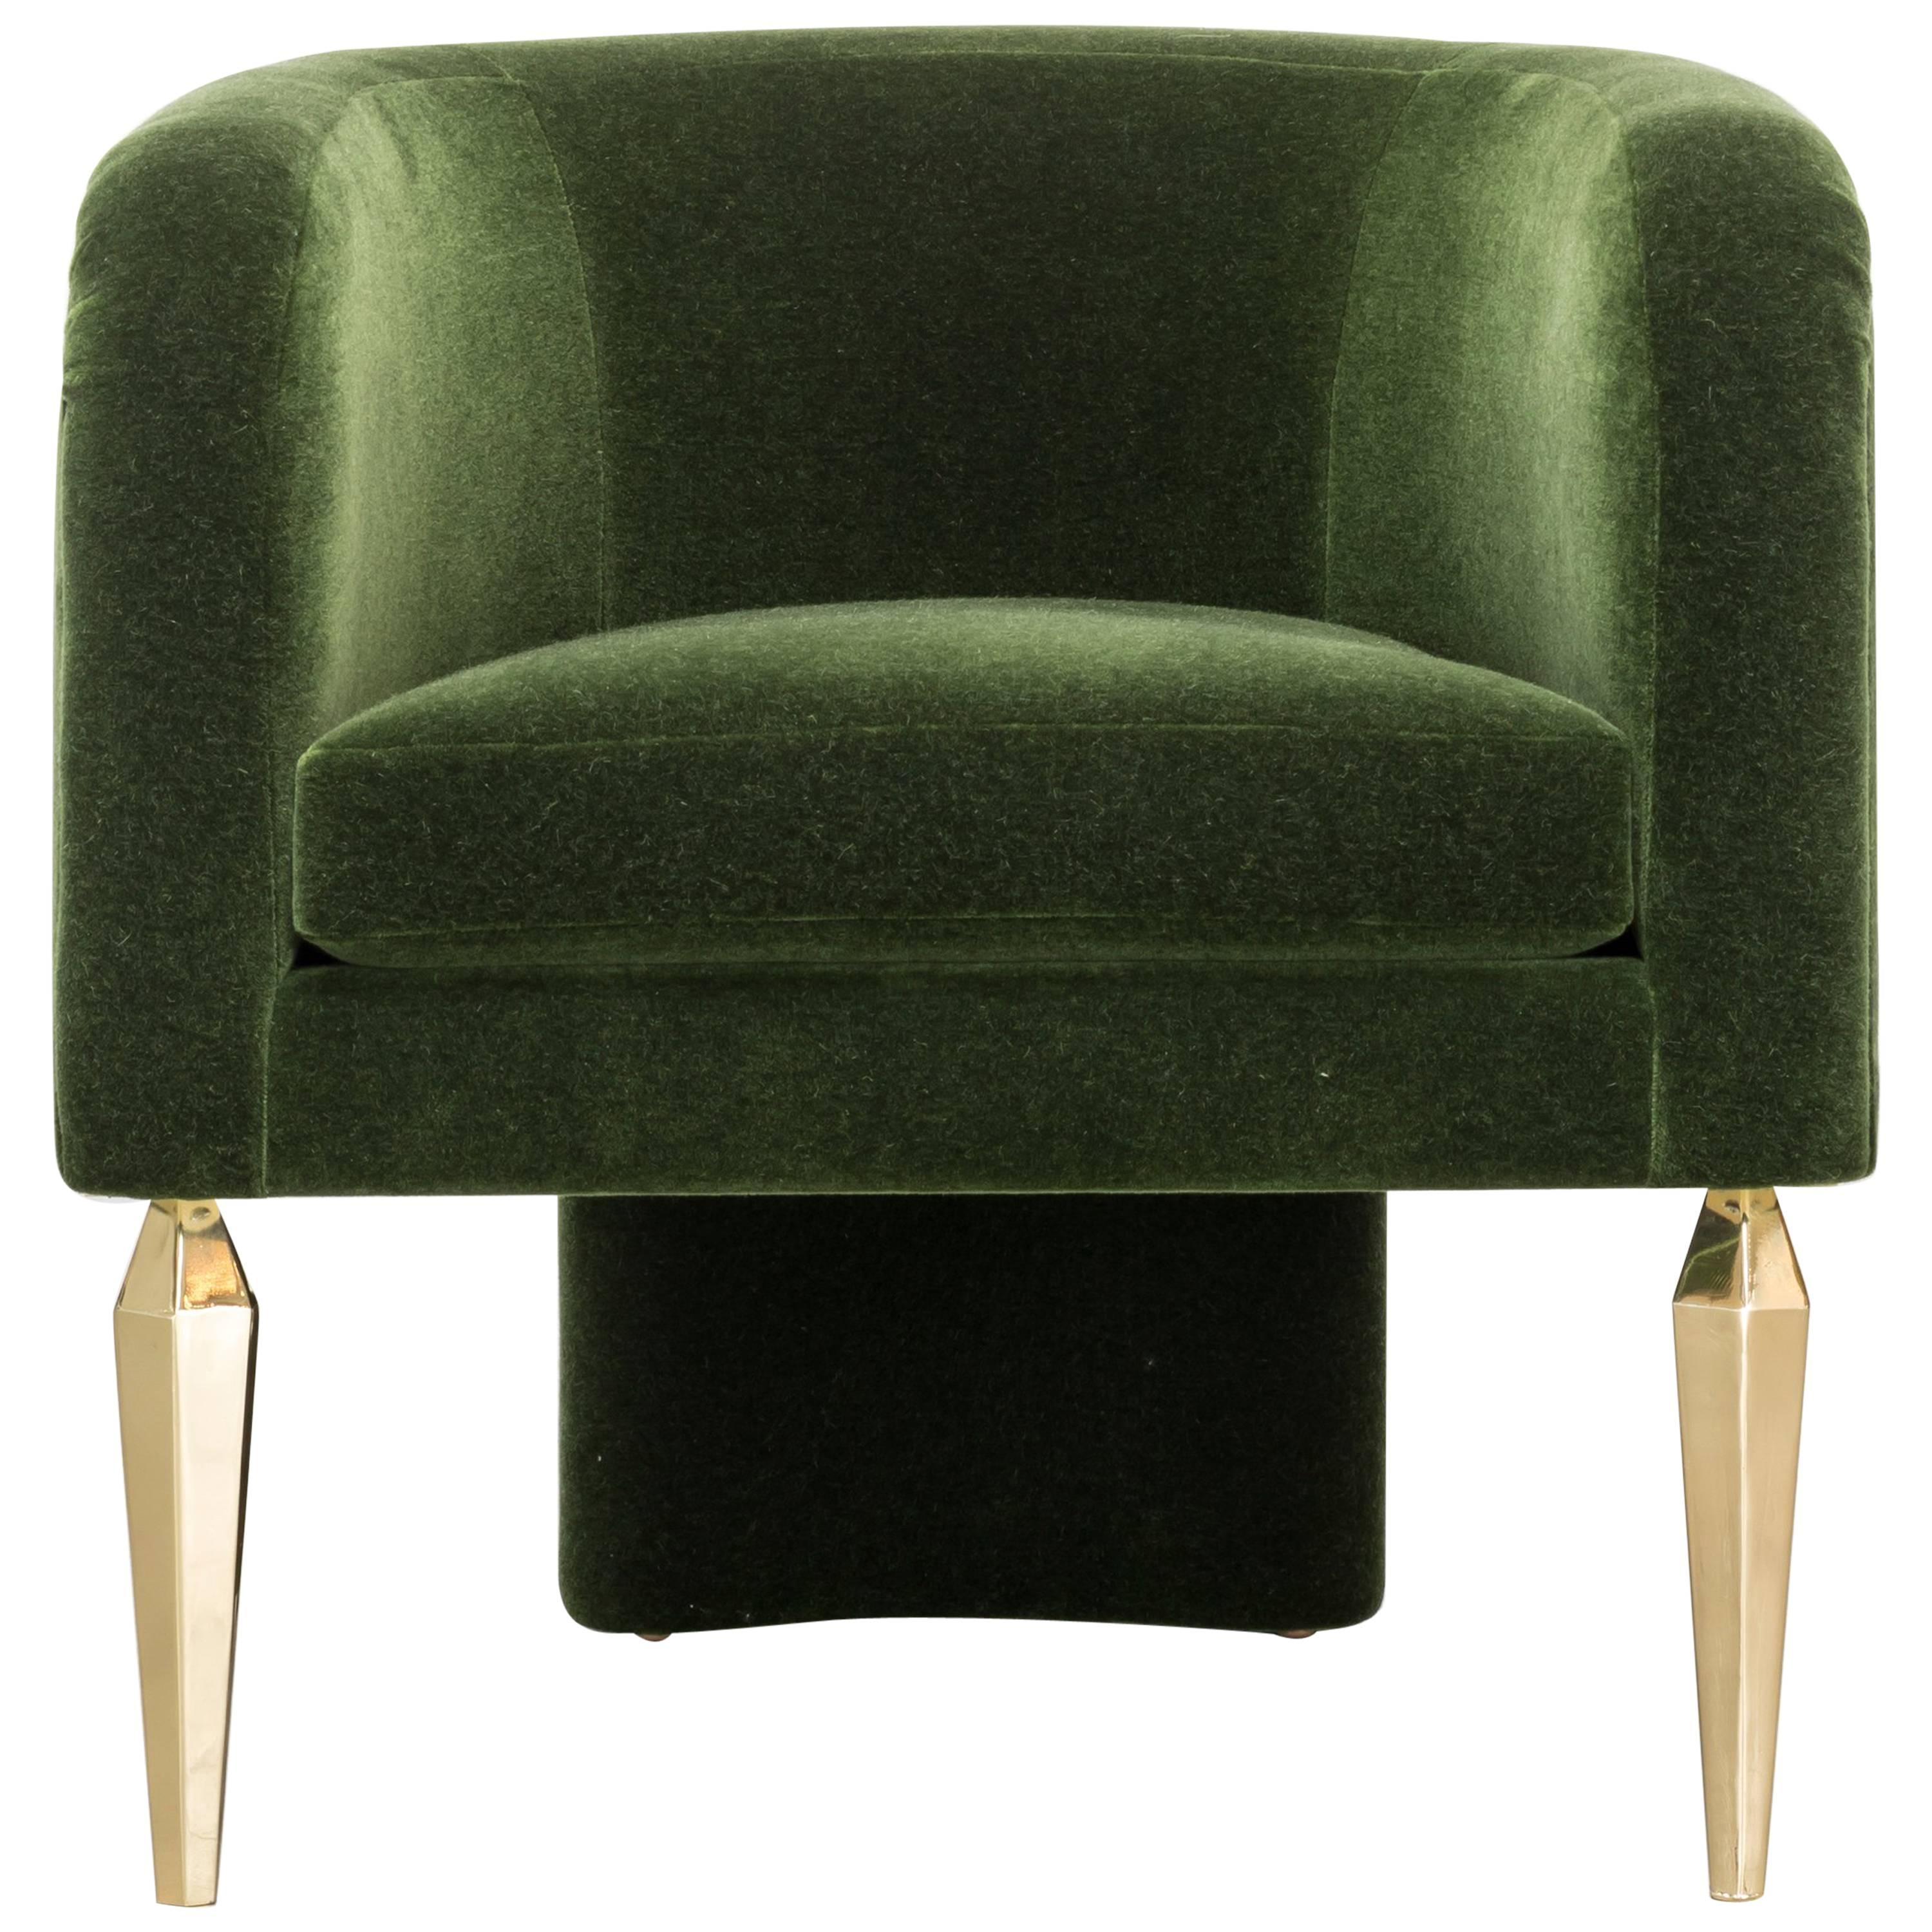 POMPE CHAIR - Modern Mohair Chair with Stiletto Legs and a Waterfall Back